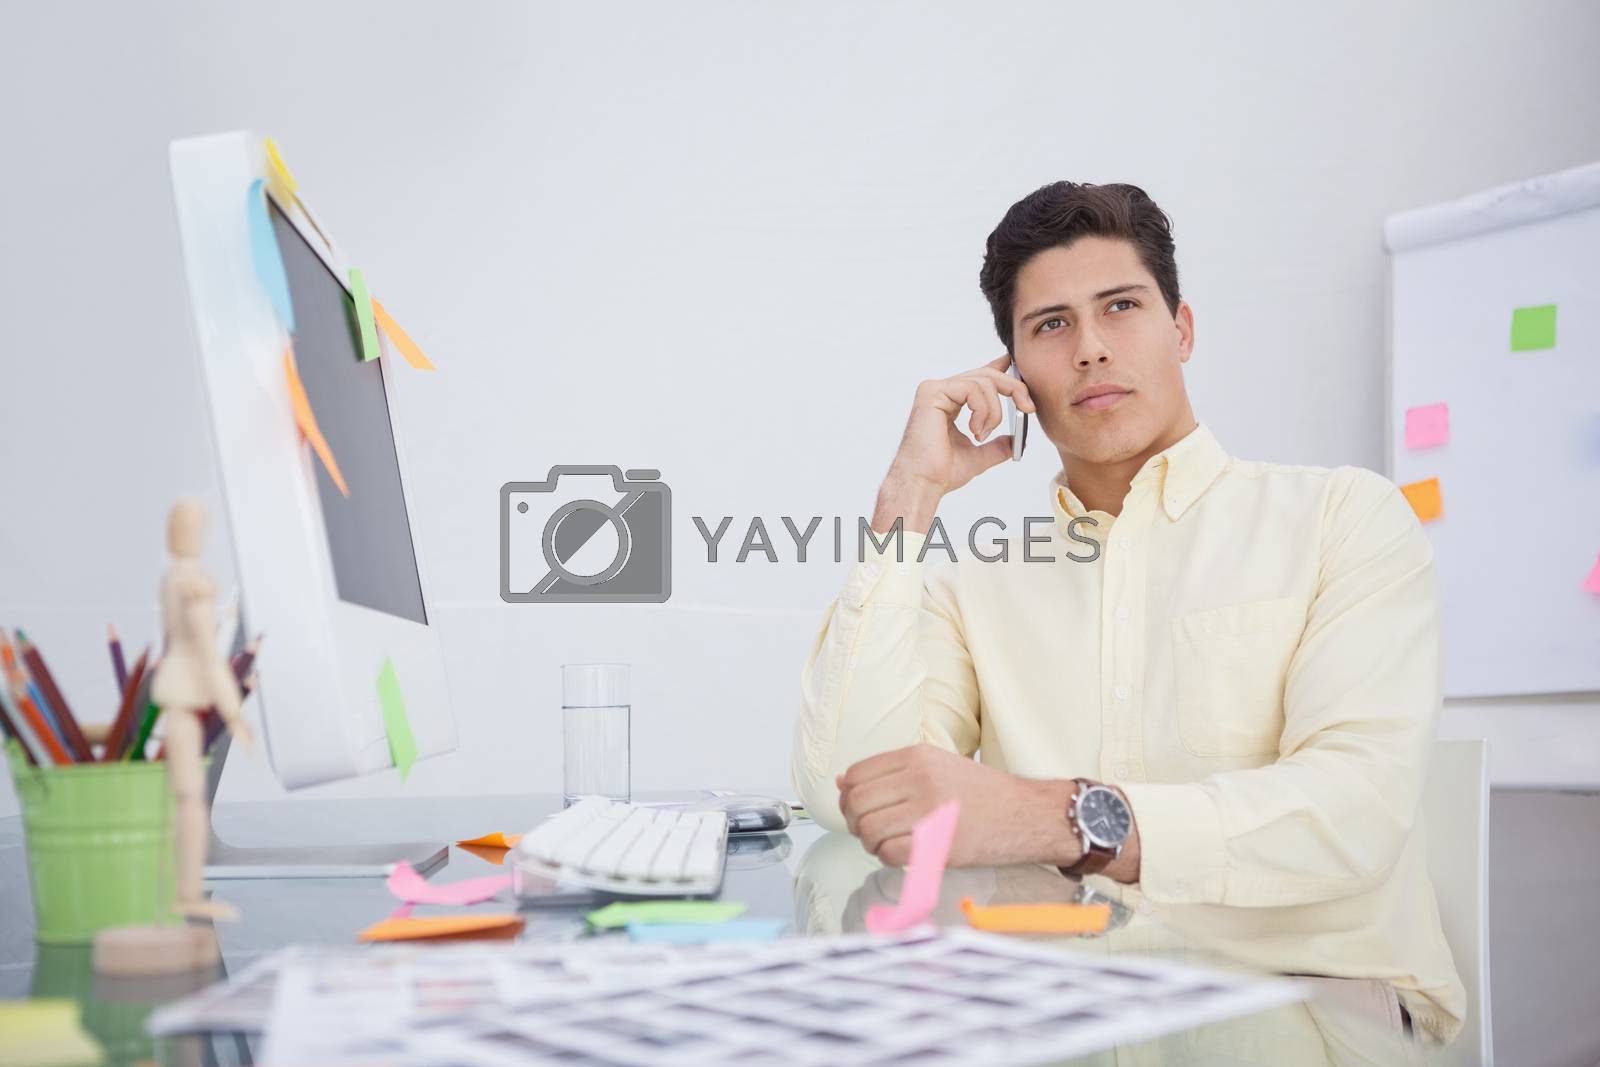 Royalty free image of Serious businessman on the phone by Wavebreakmedia